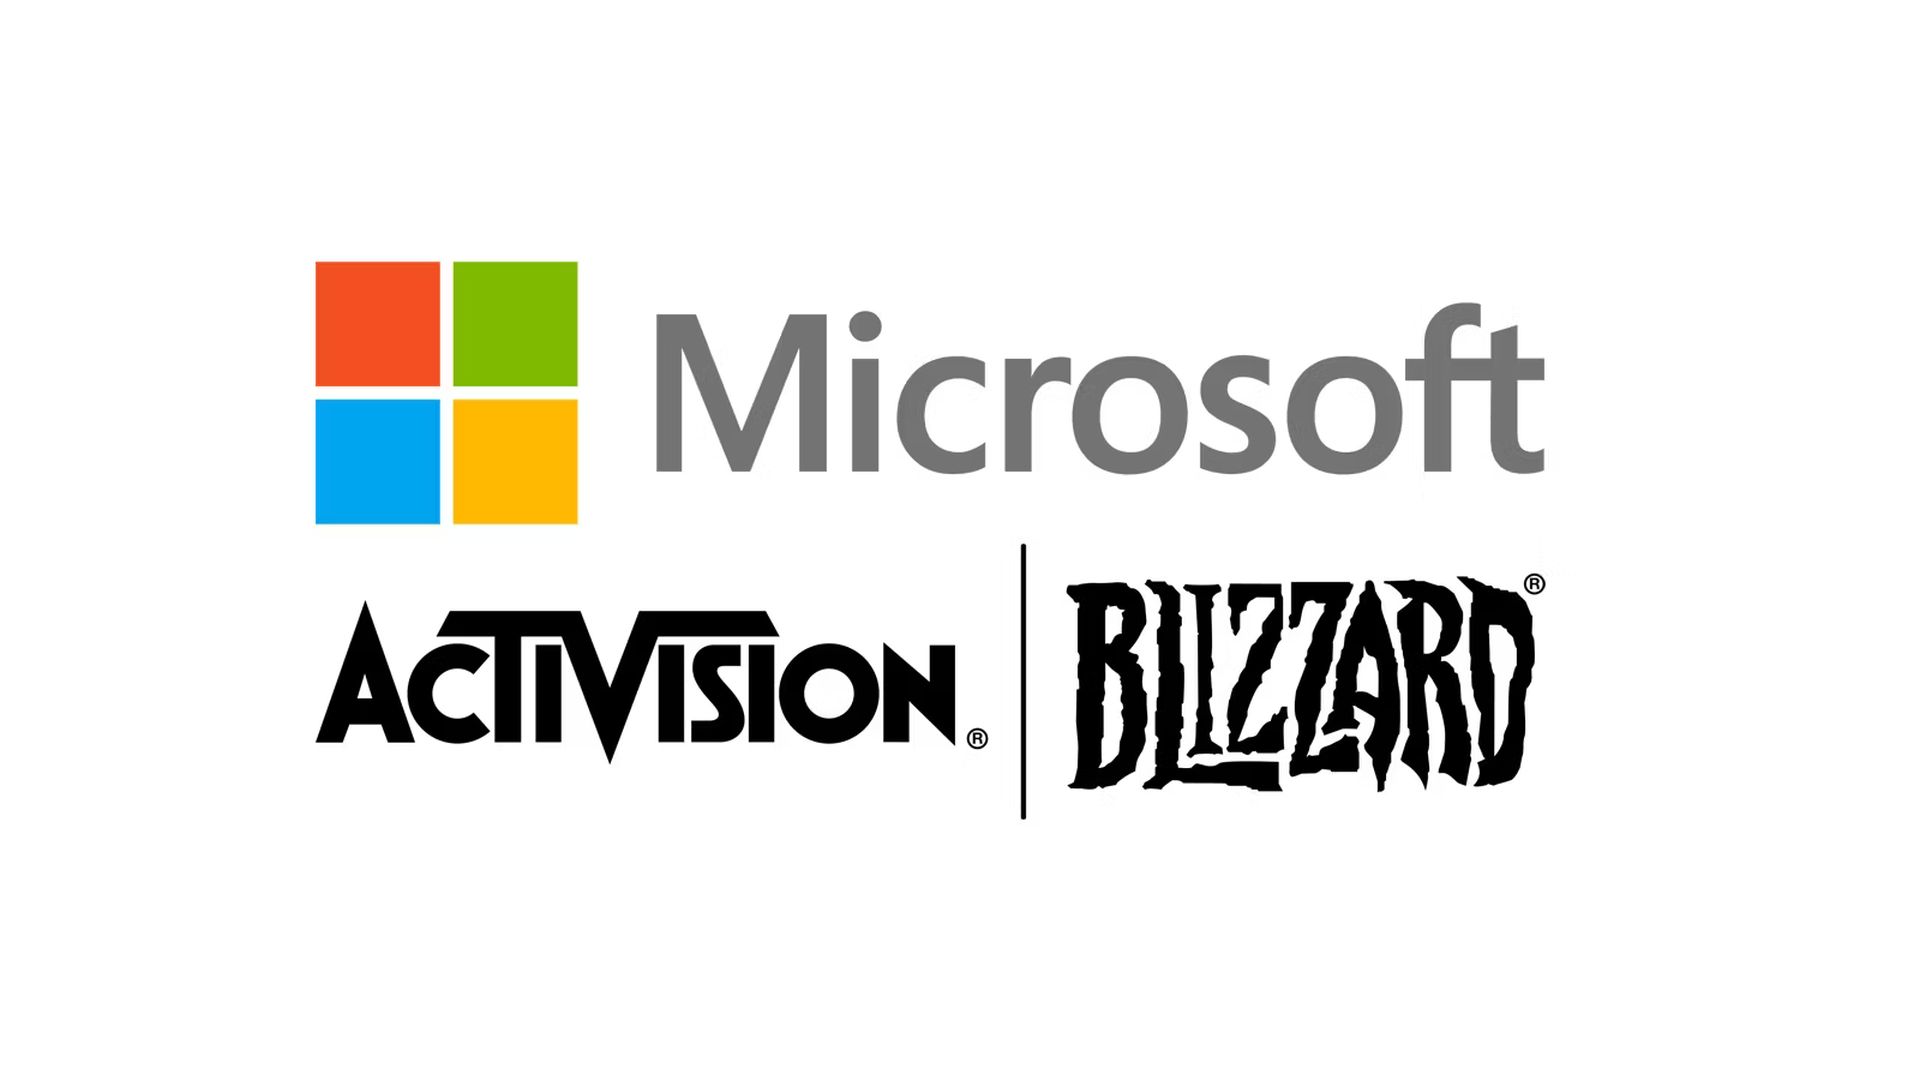 FTC Injunction Denied by Judge in Microsoft’s Acquisition of Activision Blizzard